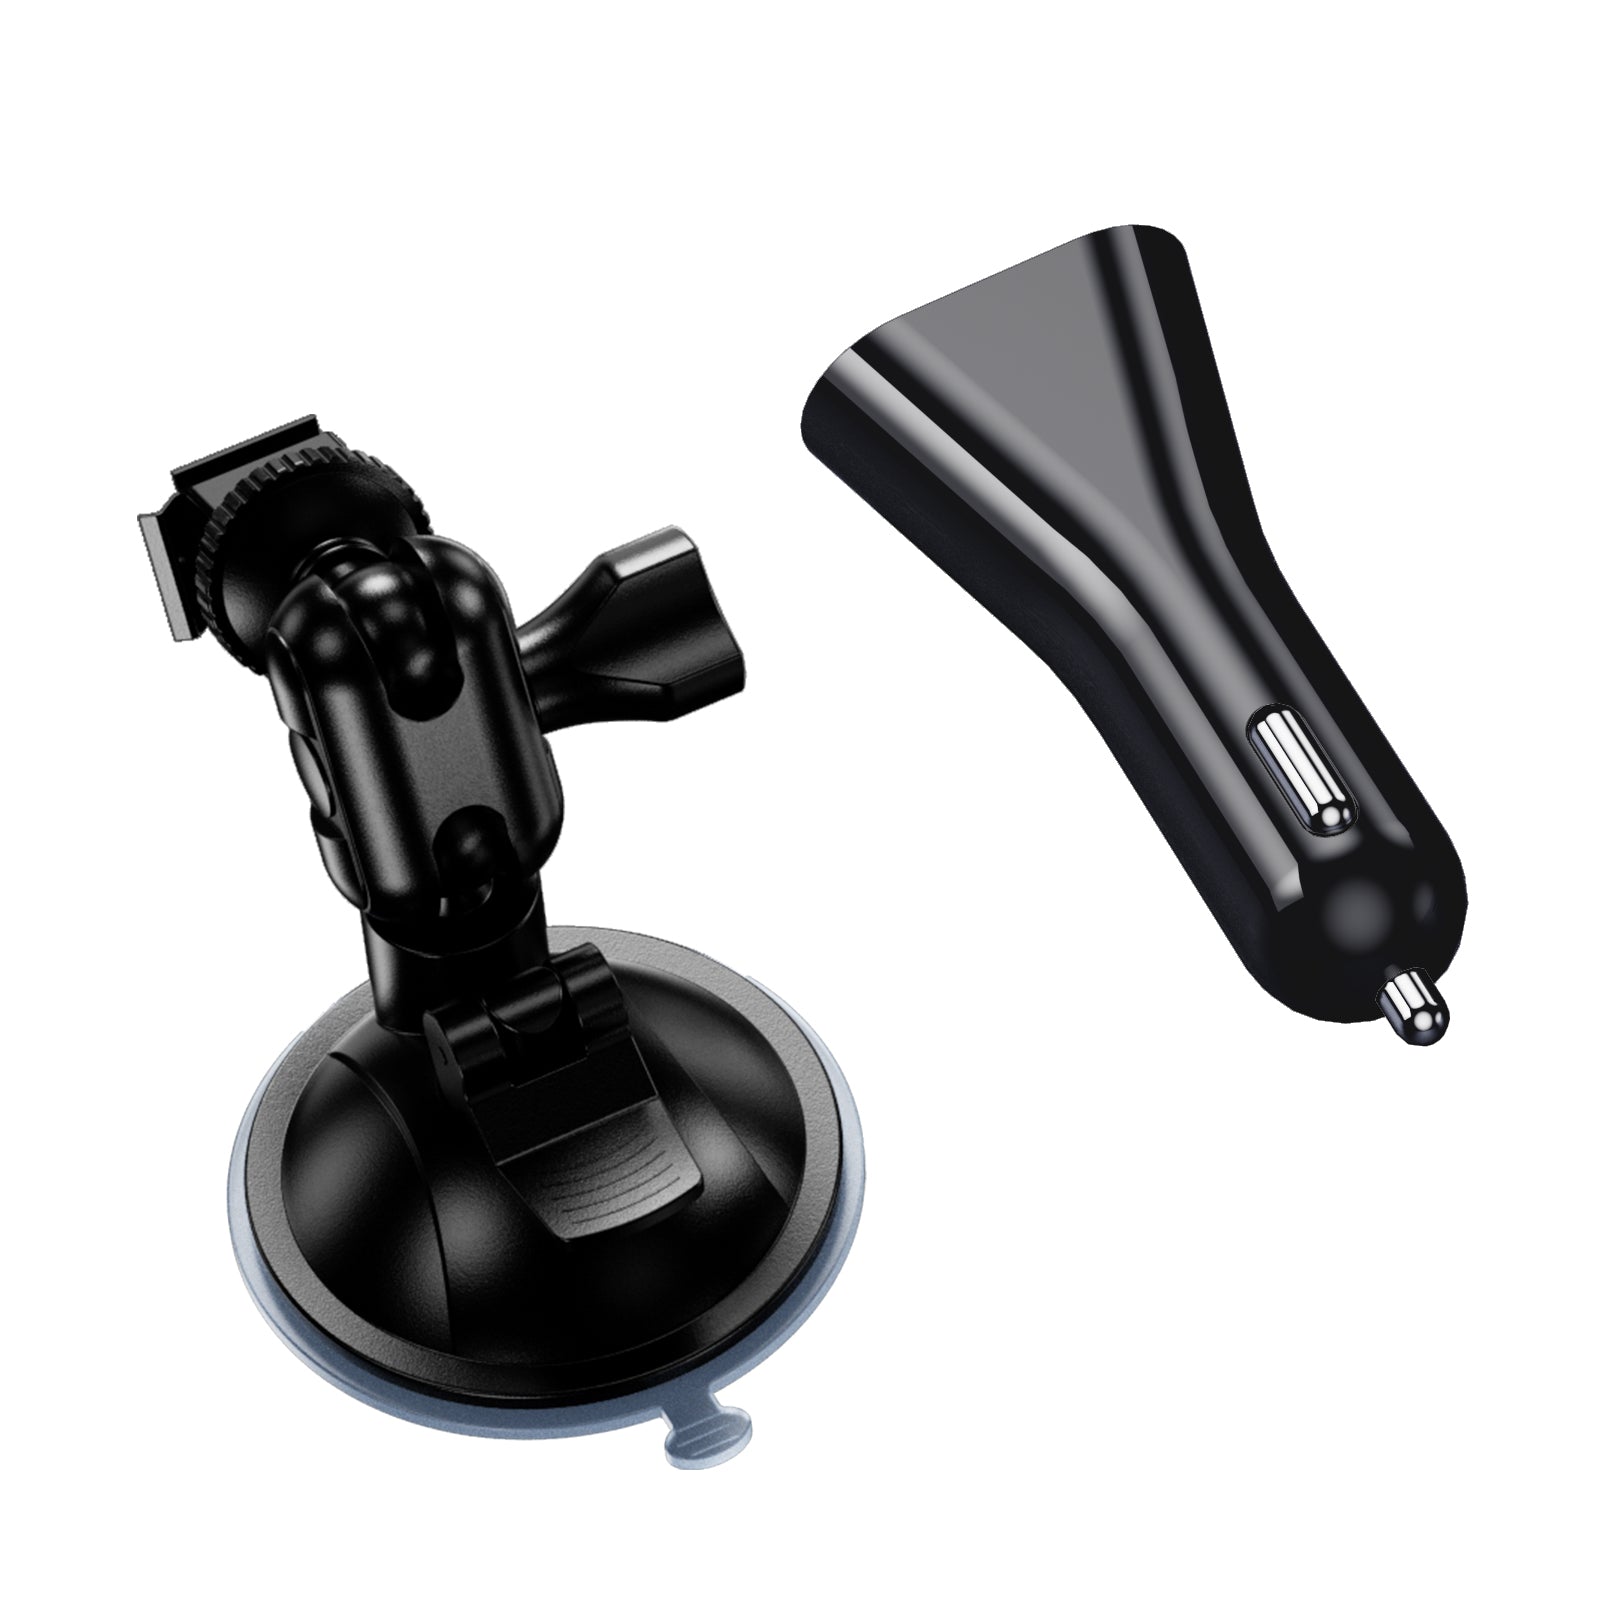 BOBLOV M7 / M7 Pro Car Suction Set, Car Suction Mount & Car Charger ONLY for M7 / M7 Pro Body Camera